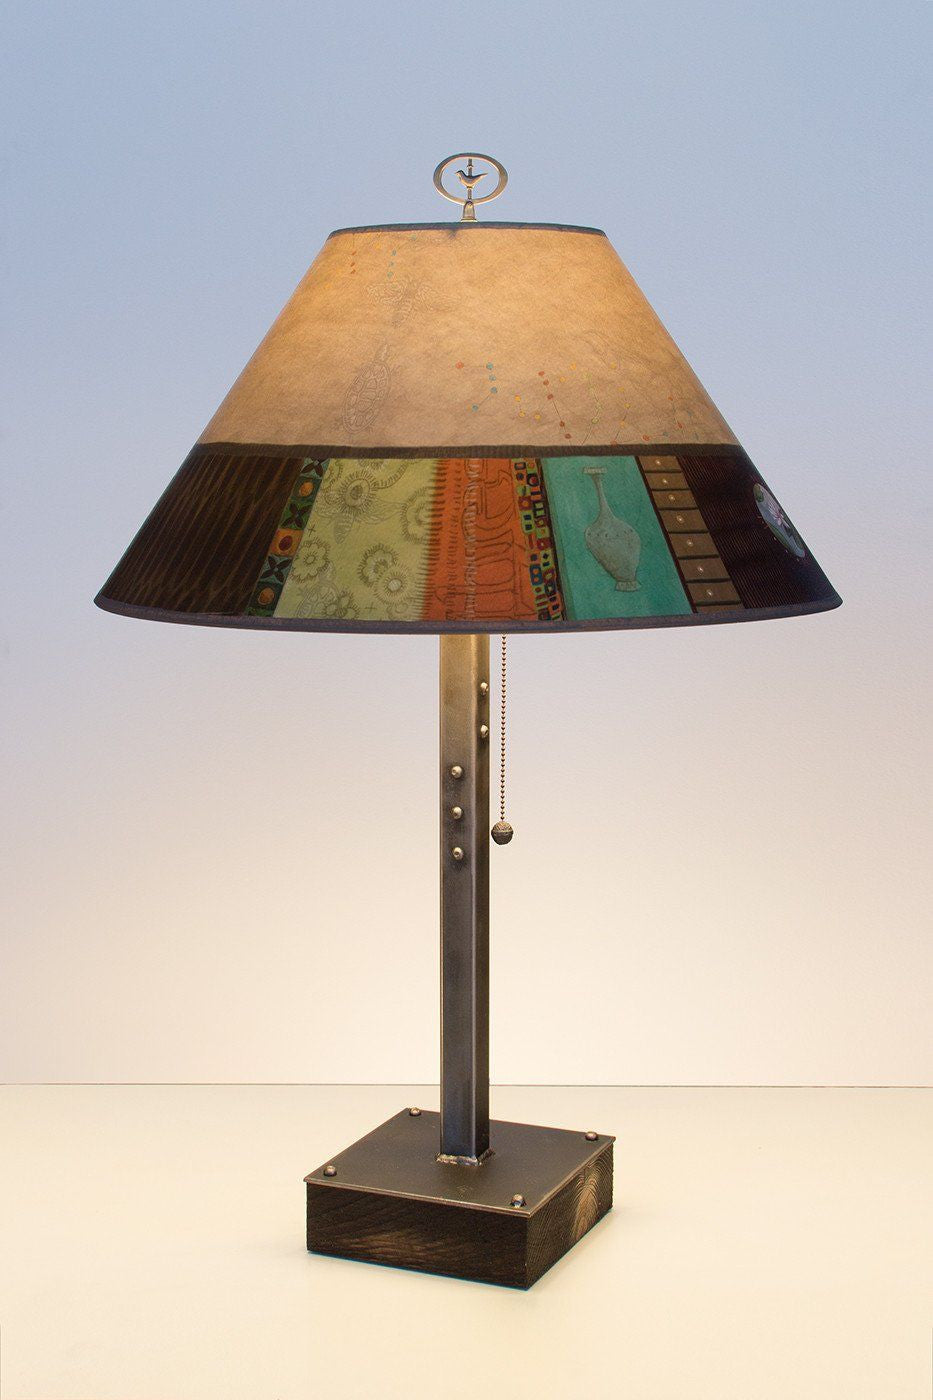 Janna Ugone &amp; Co Table Lamps Steel Table Lamp on Wood with Large Conical Shade in Linen Match